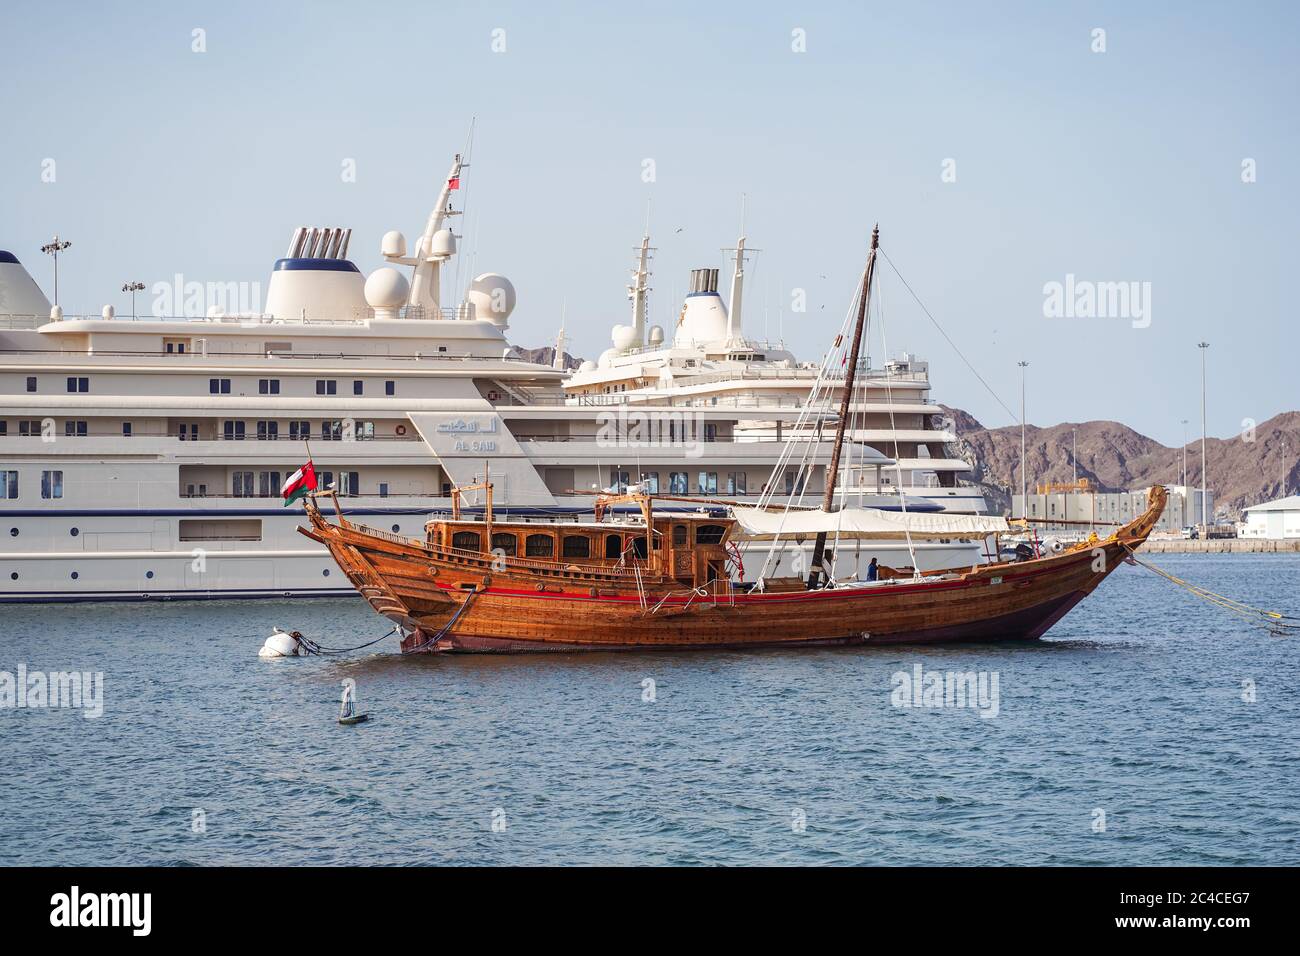 Muscat / Oman - February 15, 2020: traditional historic wooden boat next to  large tourist cruise ship anchored in the port of Muscat Stock Photo - Alamy